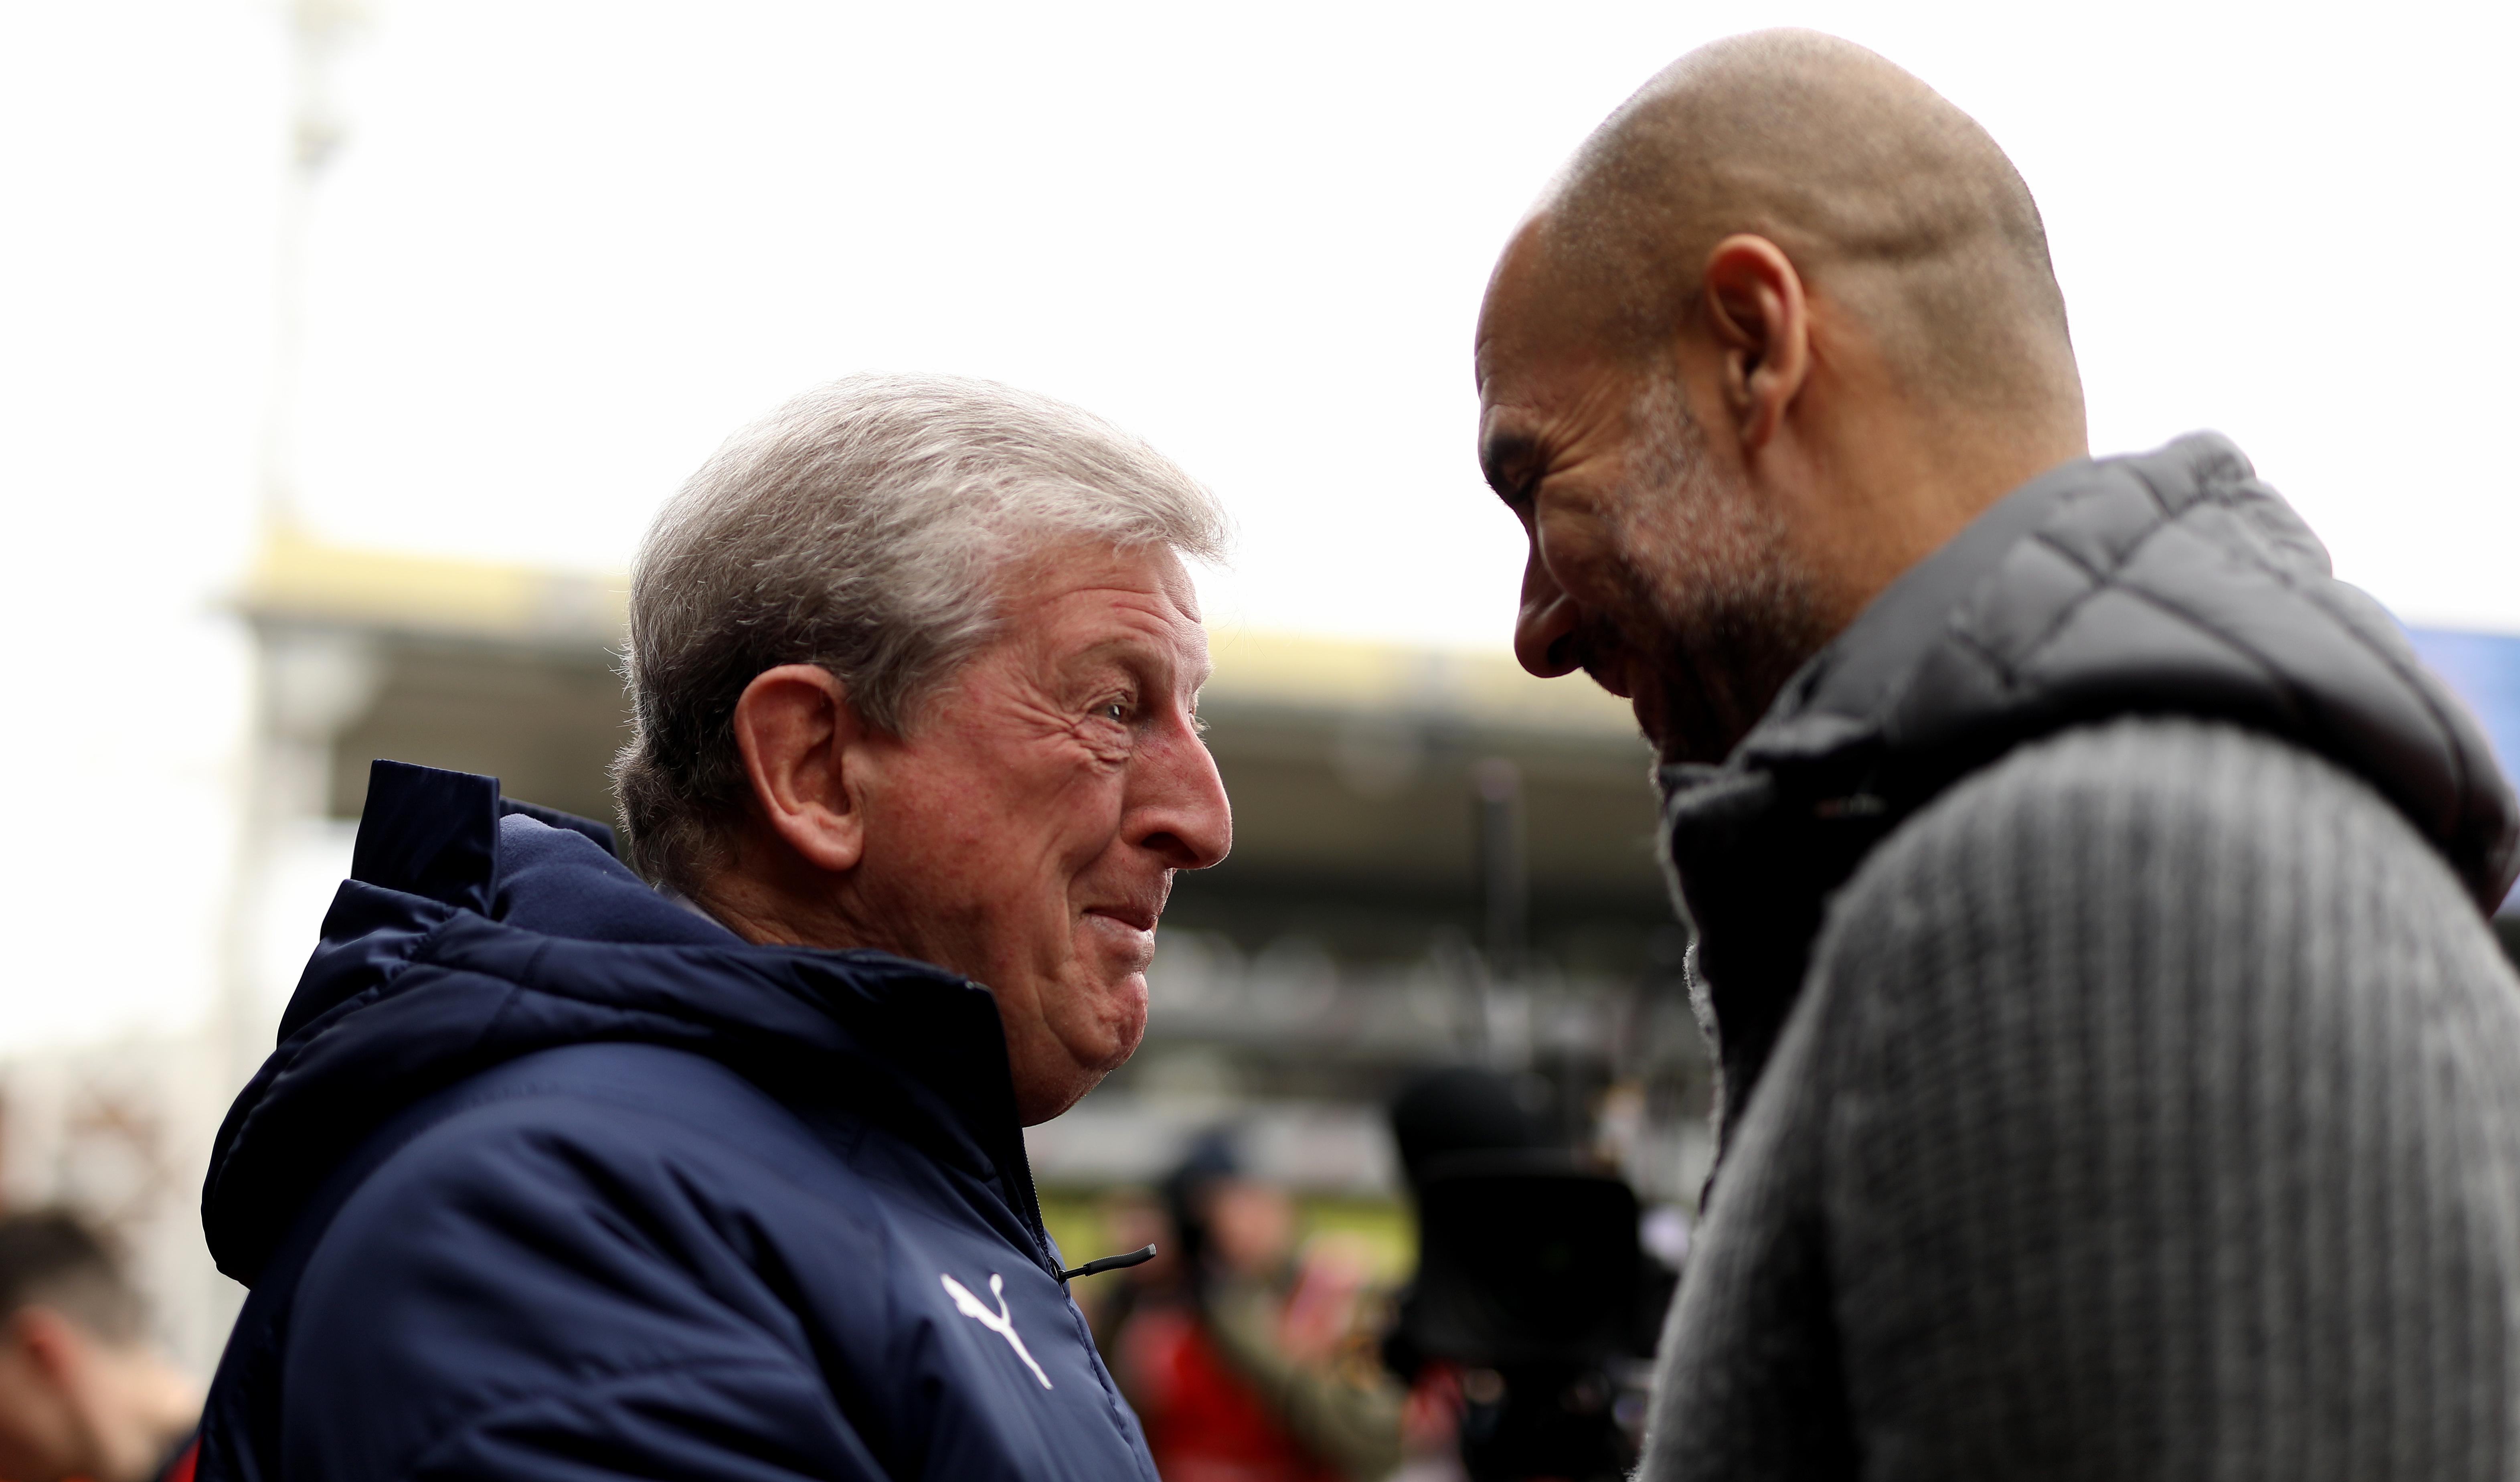 Crystal Palace manager Roy Hodgson (left) and Manchester City manager Pep Guardiola (right) before kick-off during a Premier League match at Selhurst Park, London